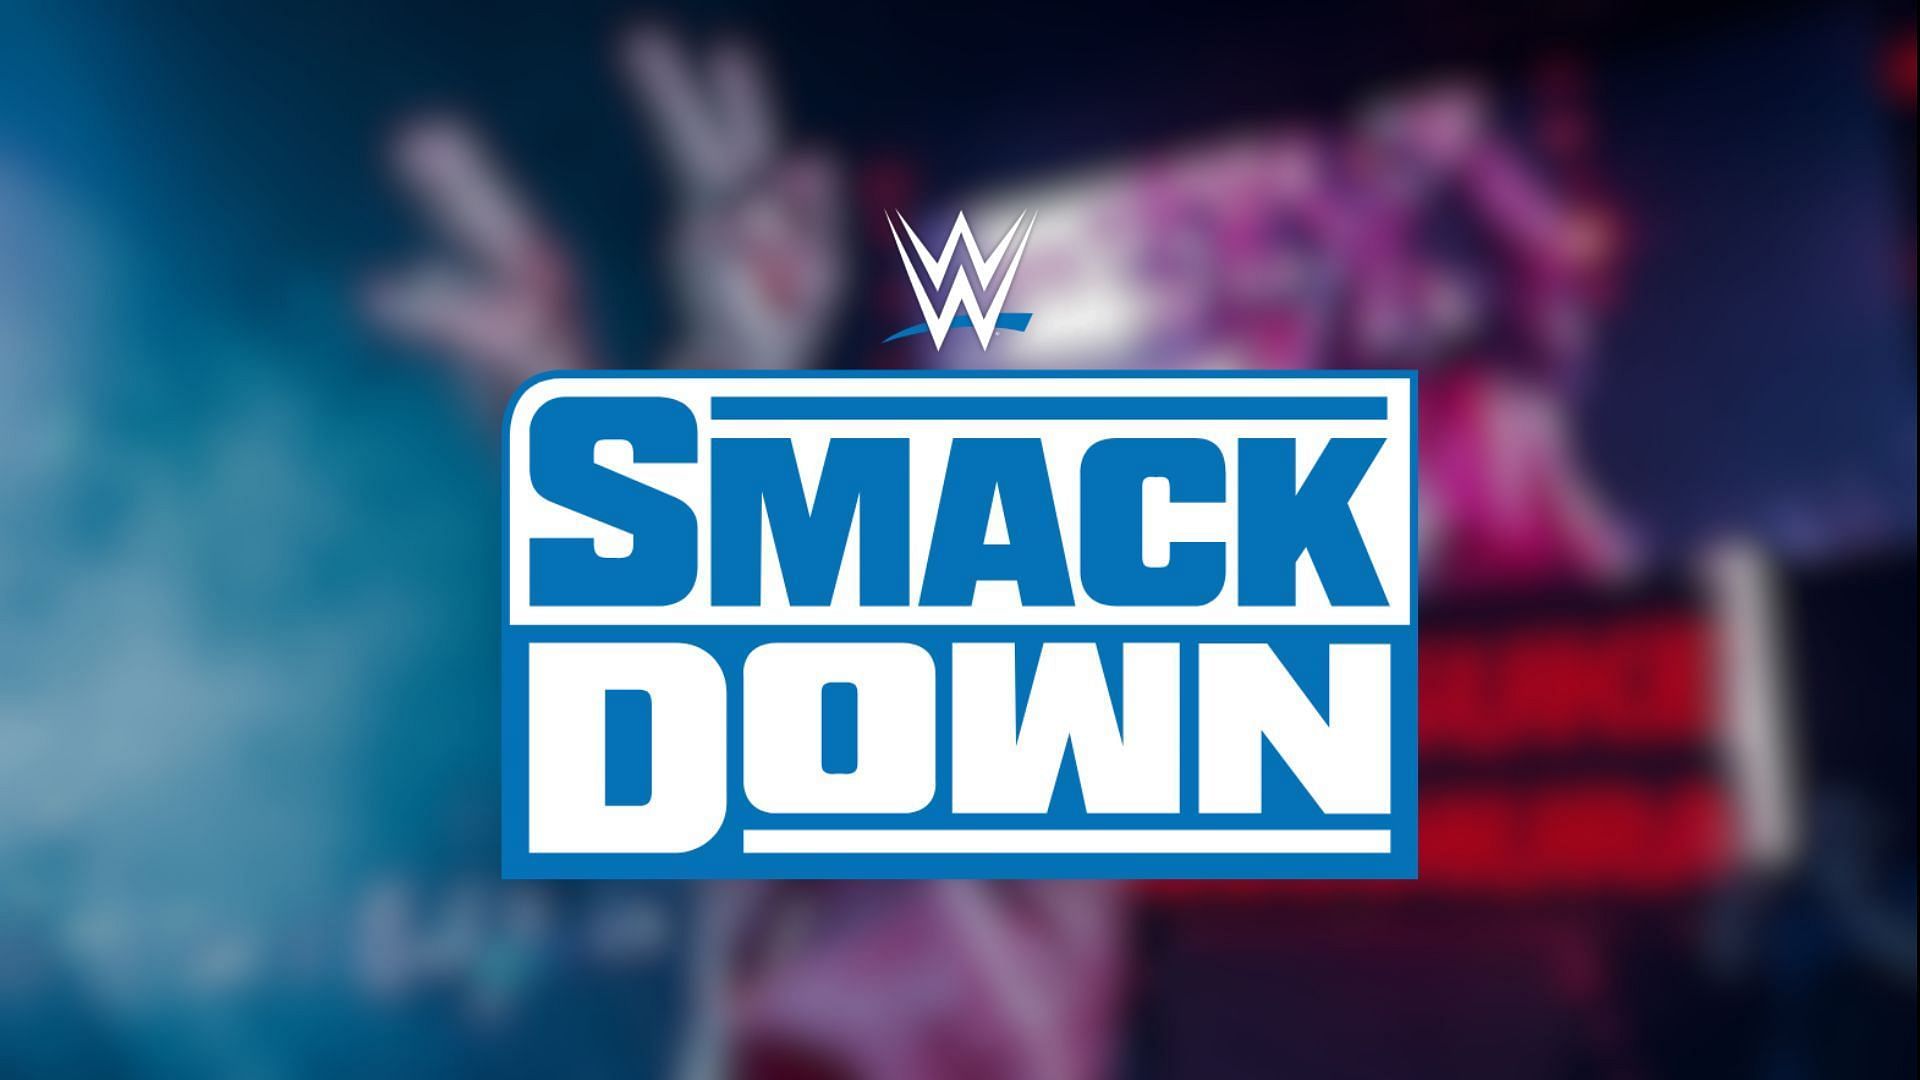 WWE SmackDown tonight will feature the return of an international star!